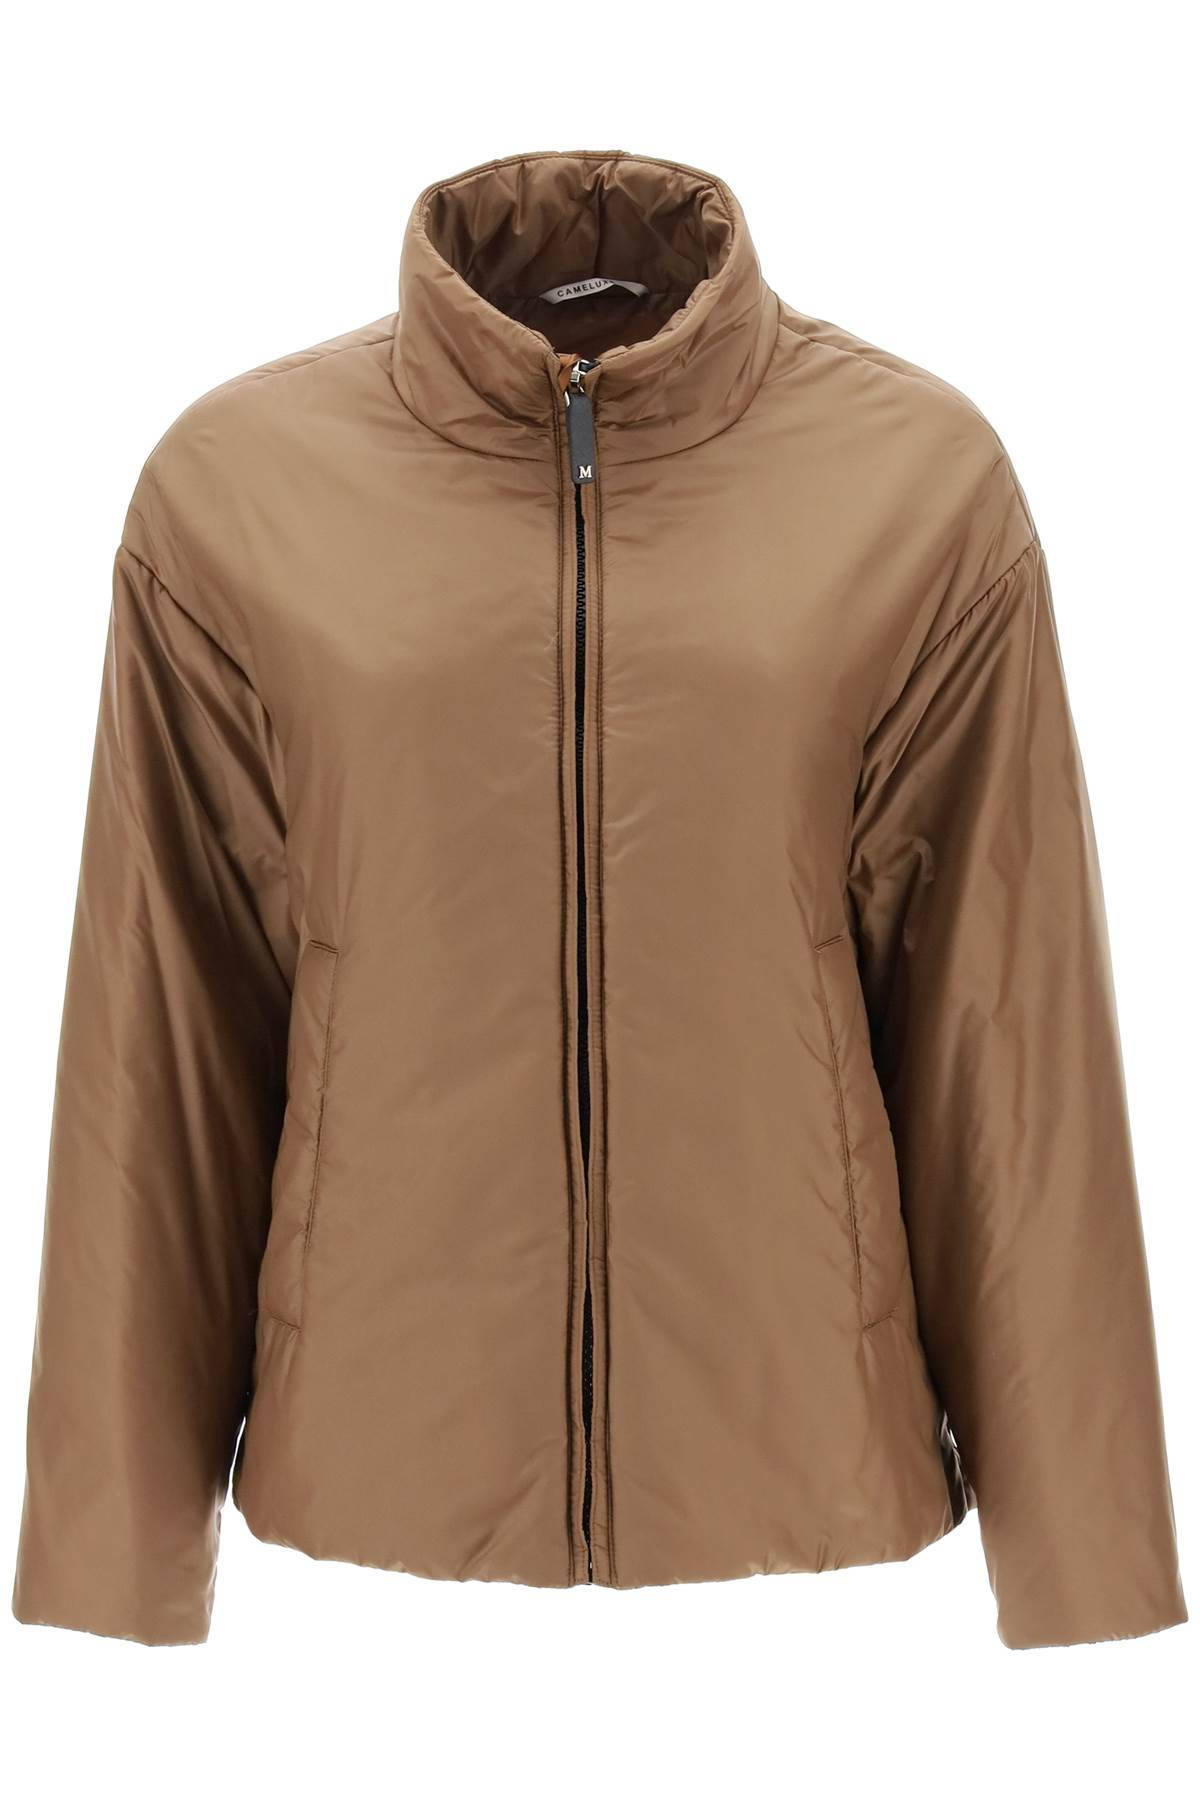 MAX MARA THE CUBE MAX MARA THE CUBE 'matisse' jacket with cameluxe padding